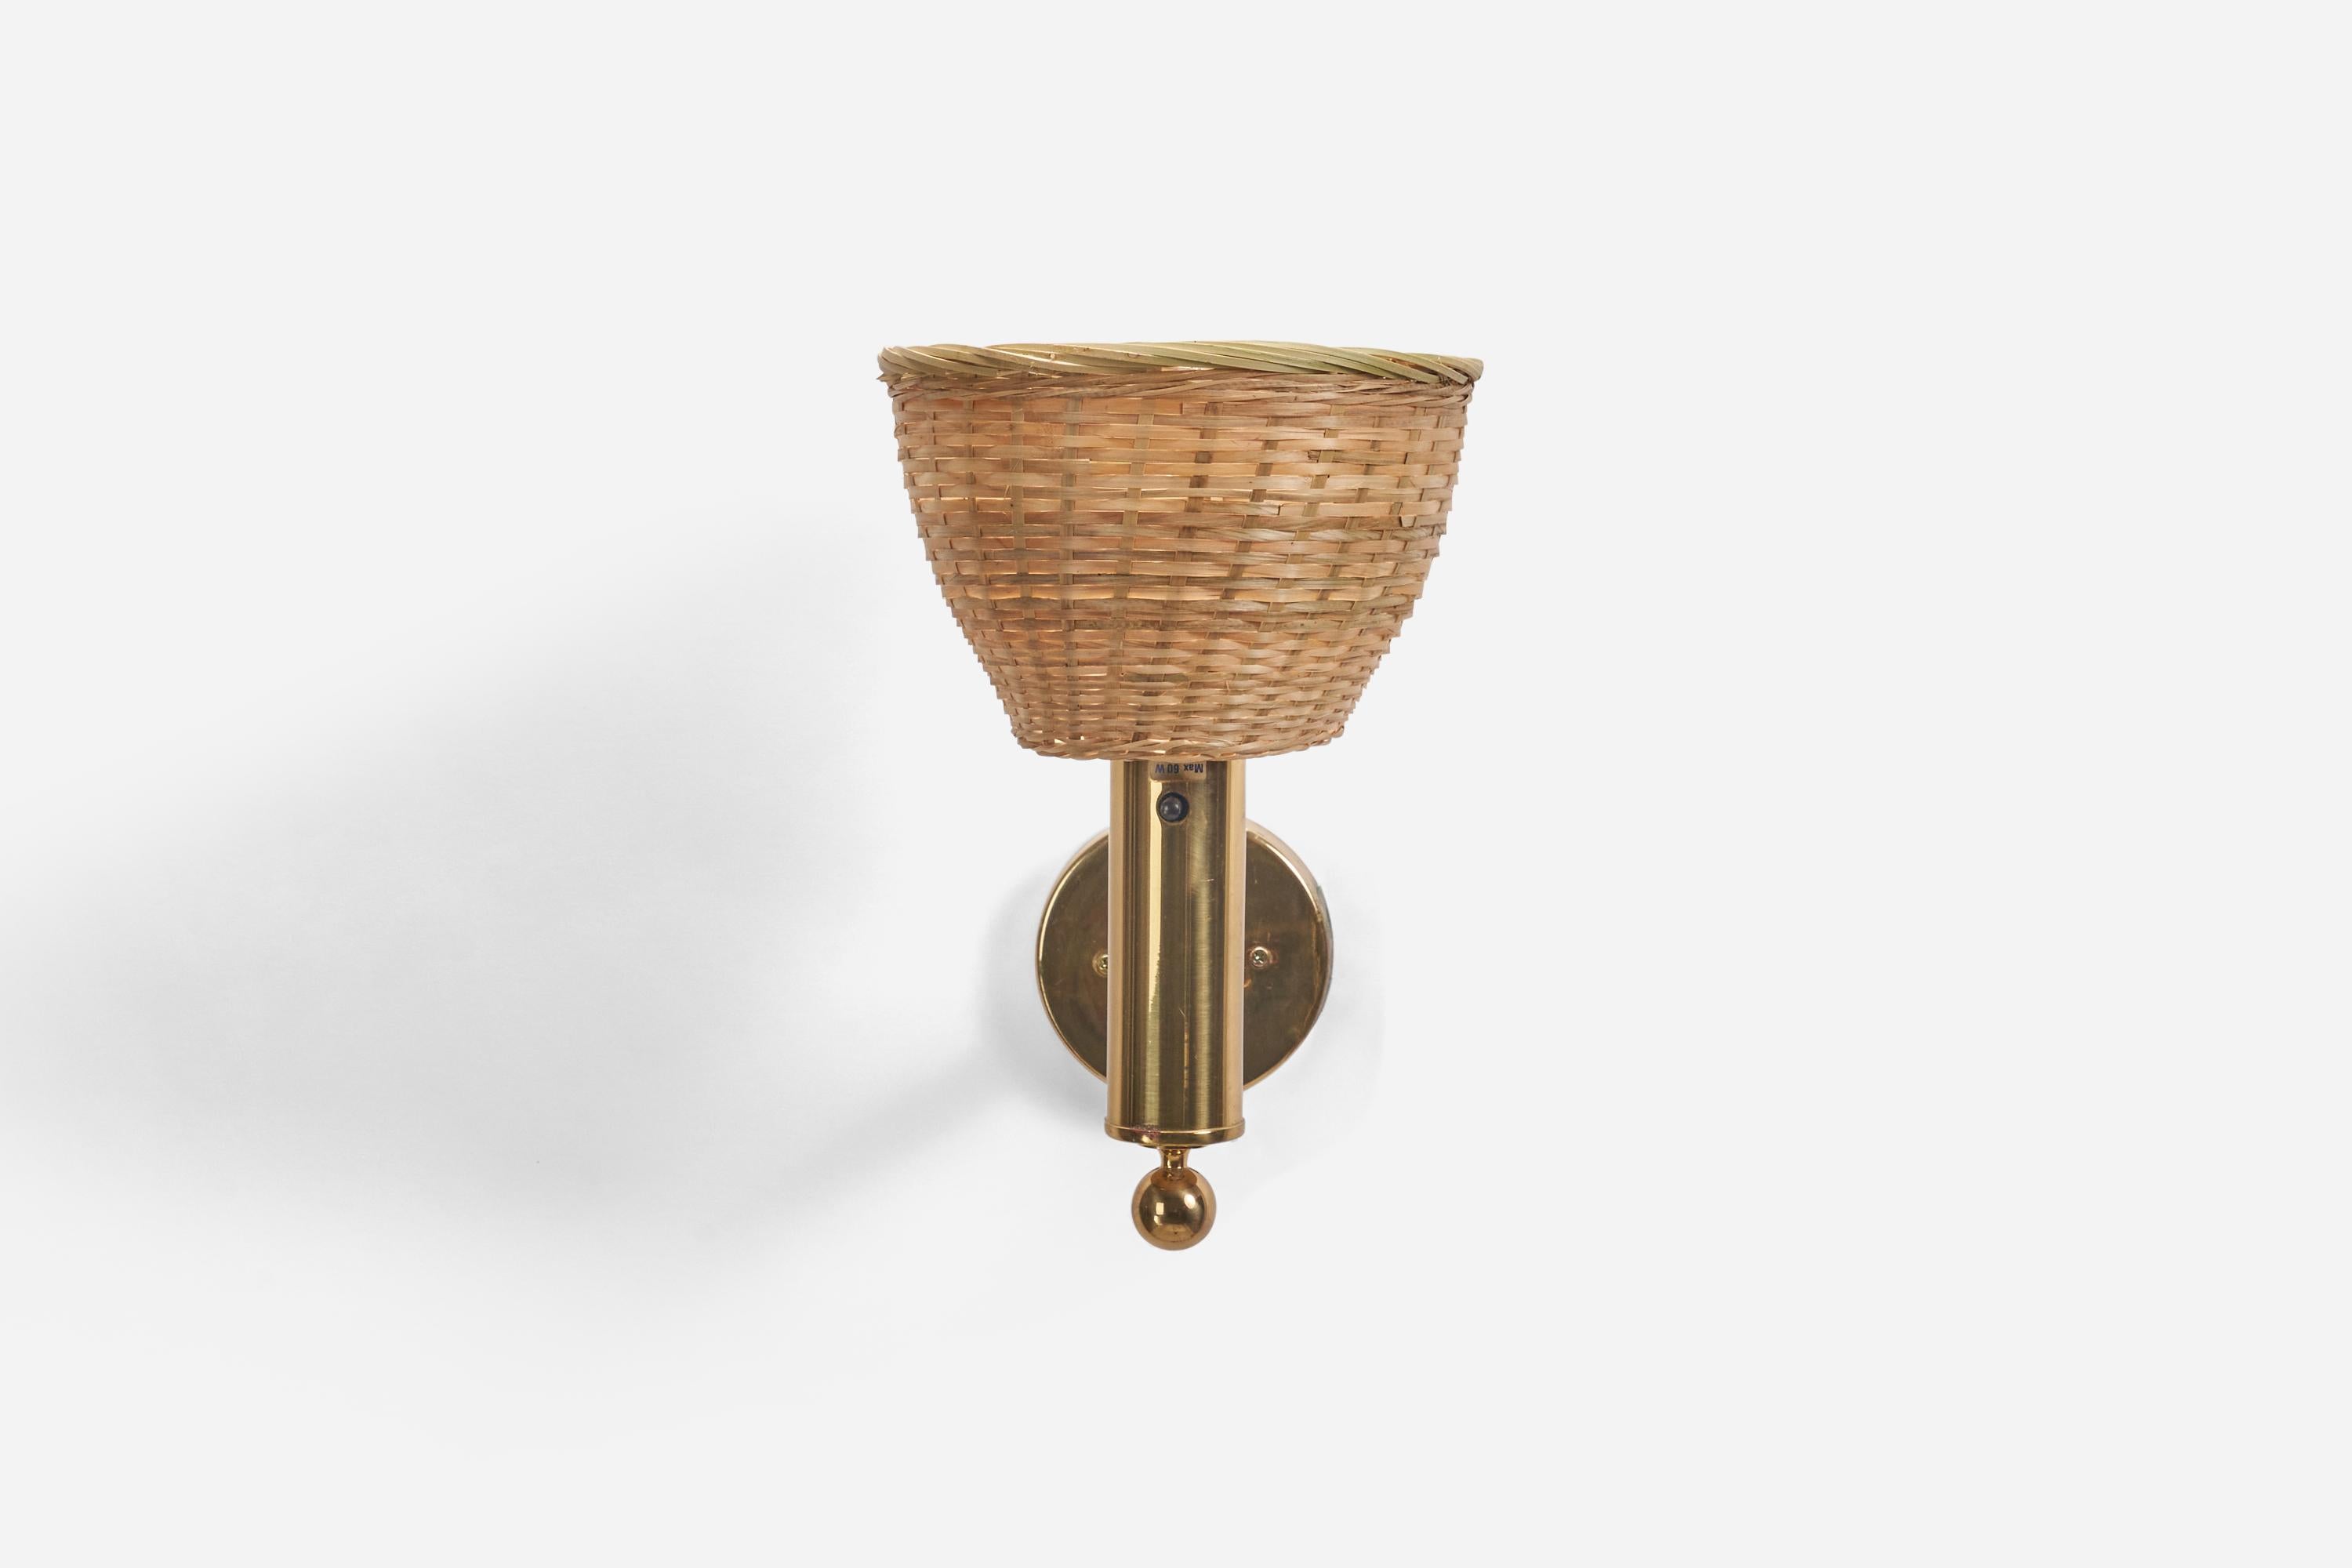 A brass and rattan sconce designed and produced by Bergboms, Sweden, 1970s.

Sold with lampshade. Dimensions stated are of sconce with lampshade.

Dimensions of back plate (inches) : 3.86 x 3.86 x 0.82 (height x width x depth)

Socket takes